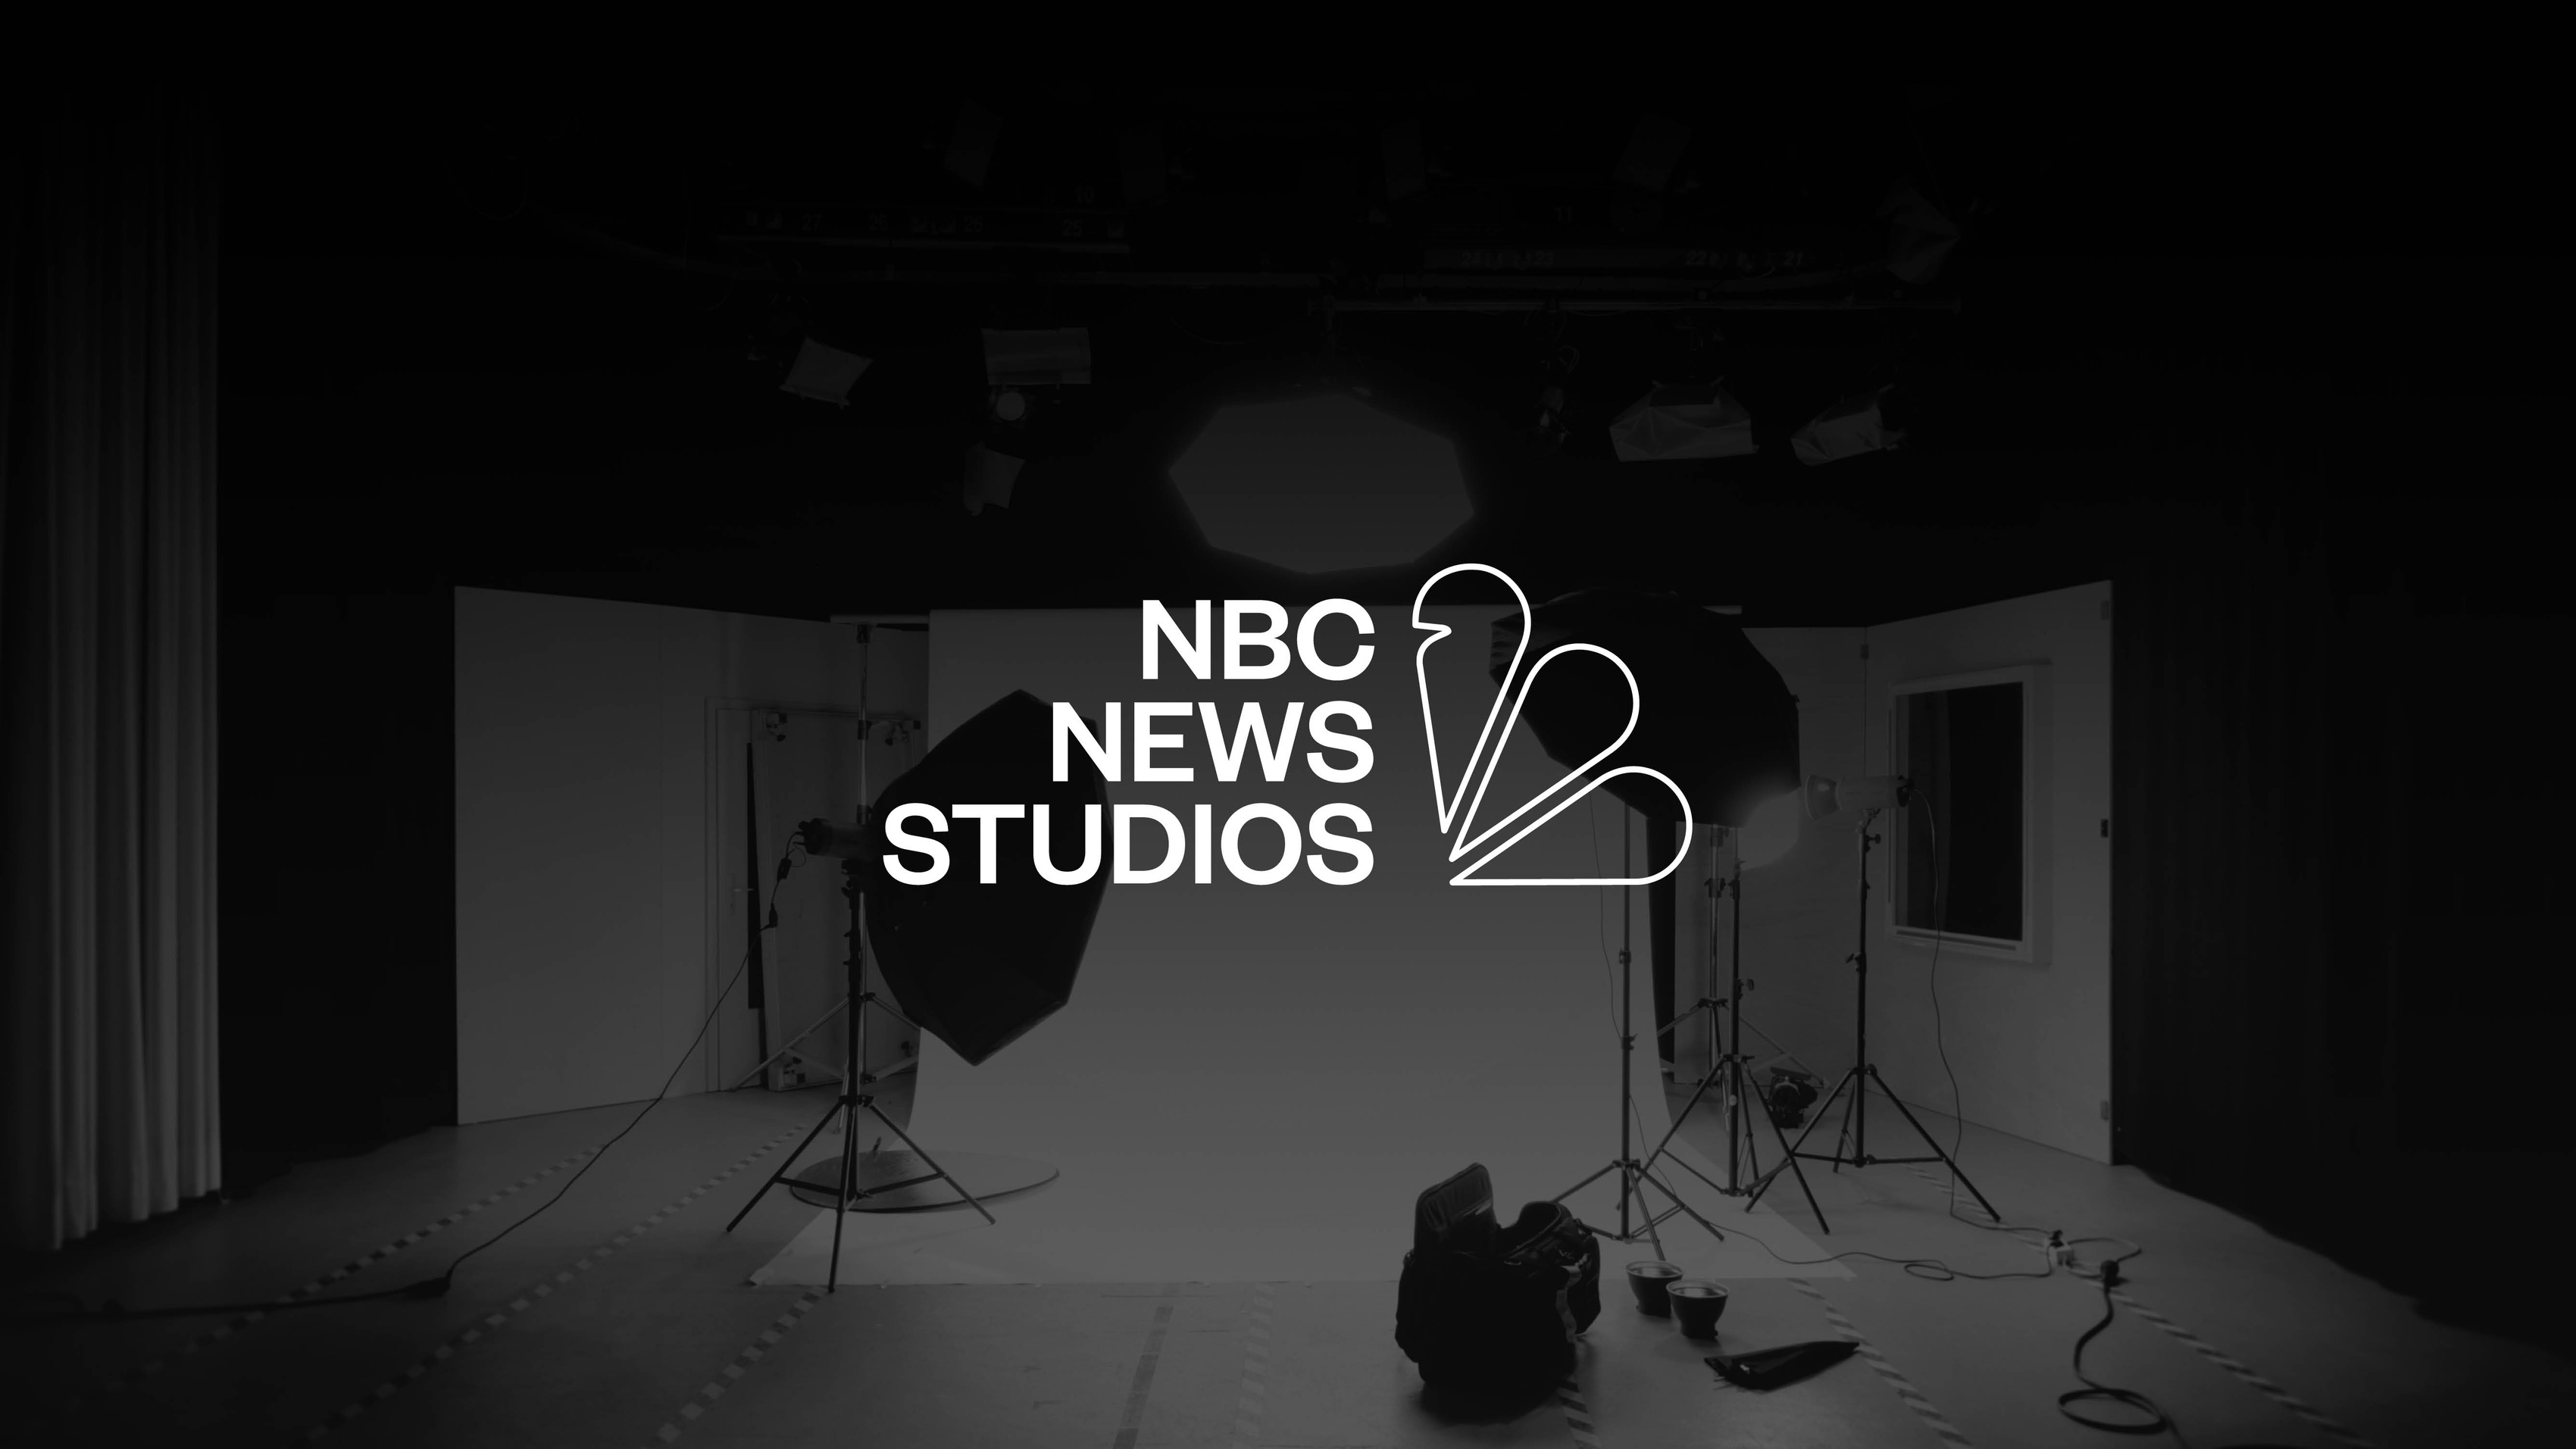 NBC News Studios logo over a picture of a studio setting in black and white